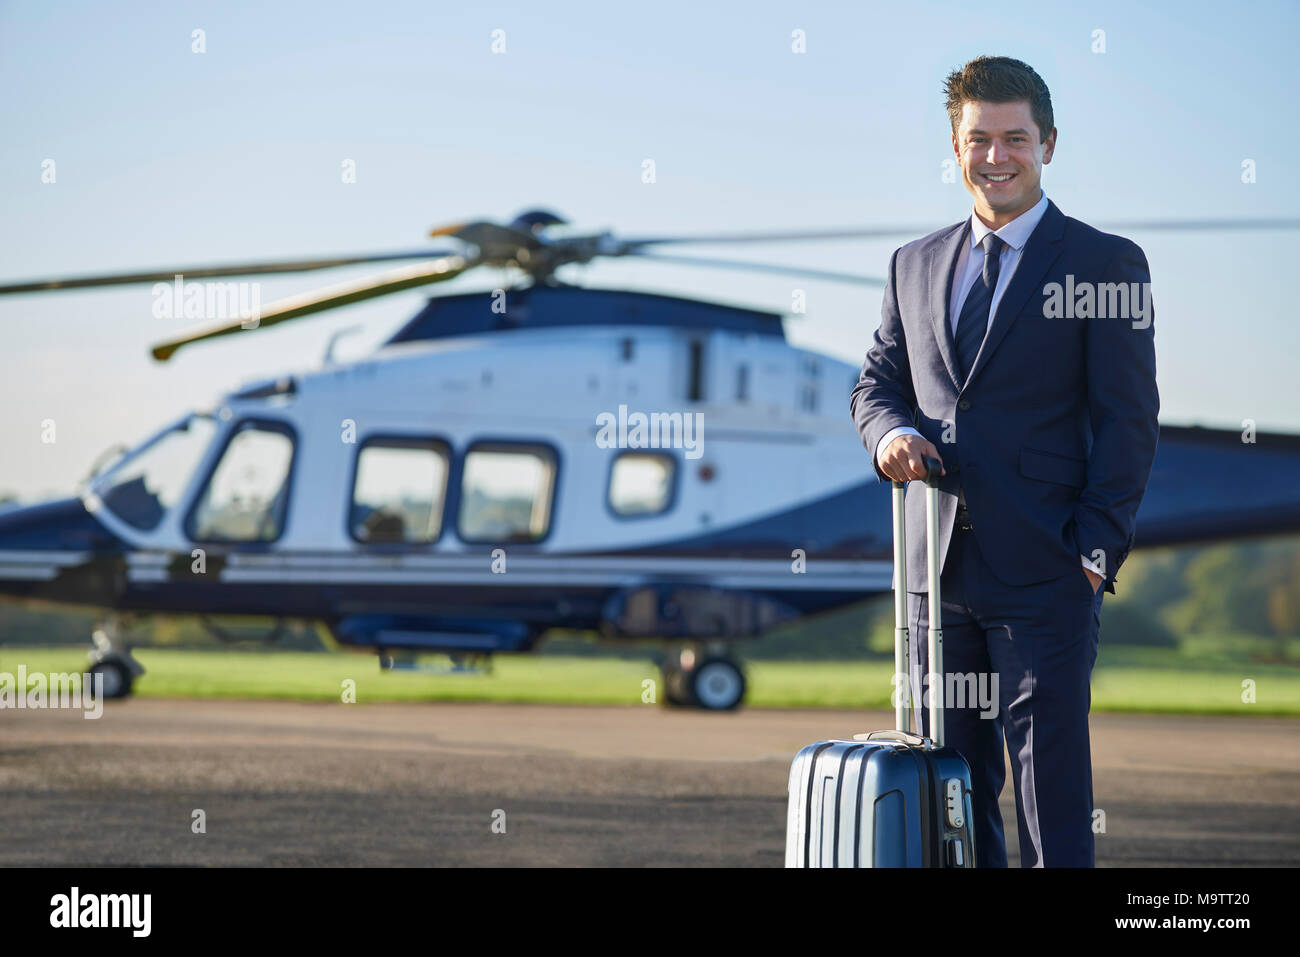 Portrait Of businessman standing in front of Helicopter Banque D'Images